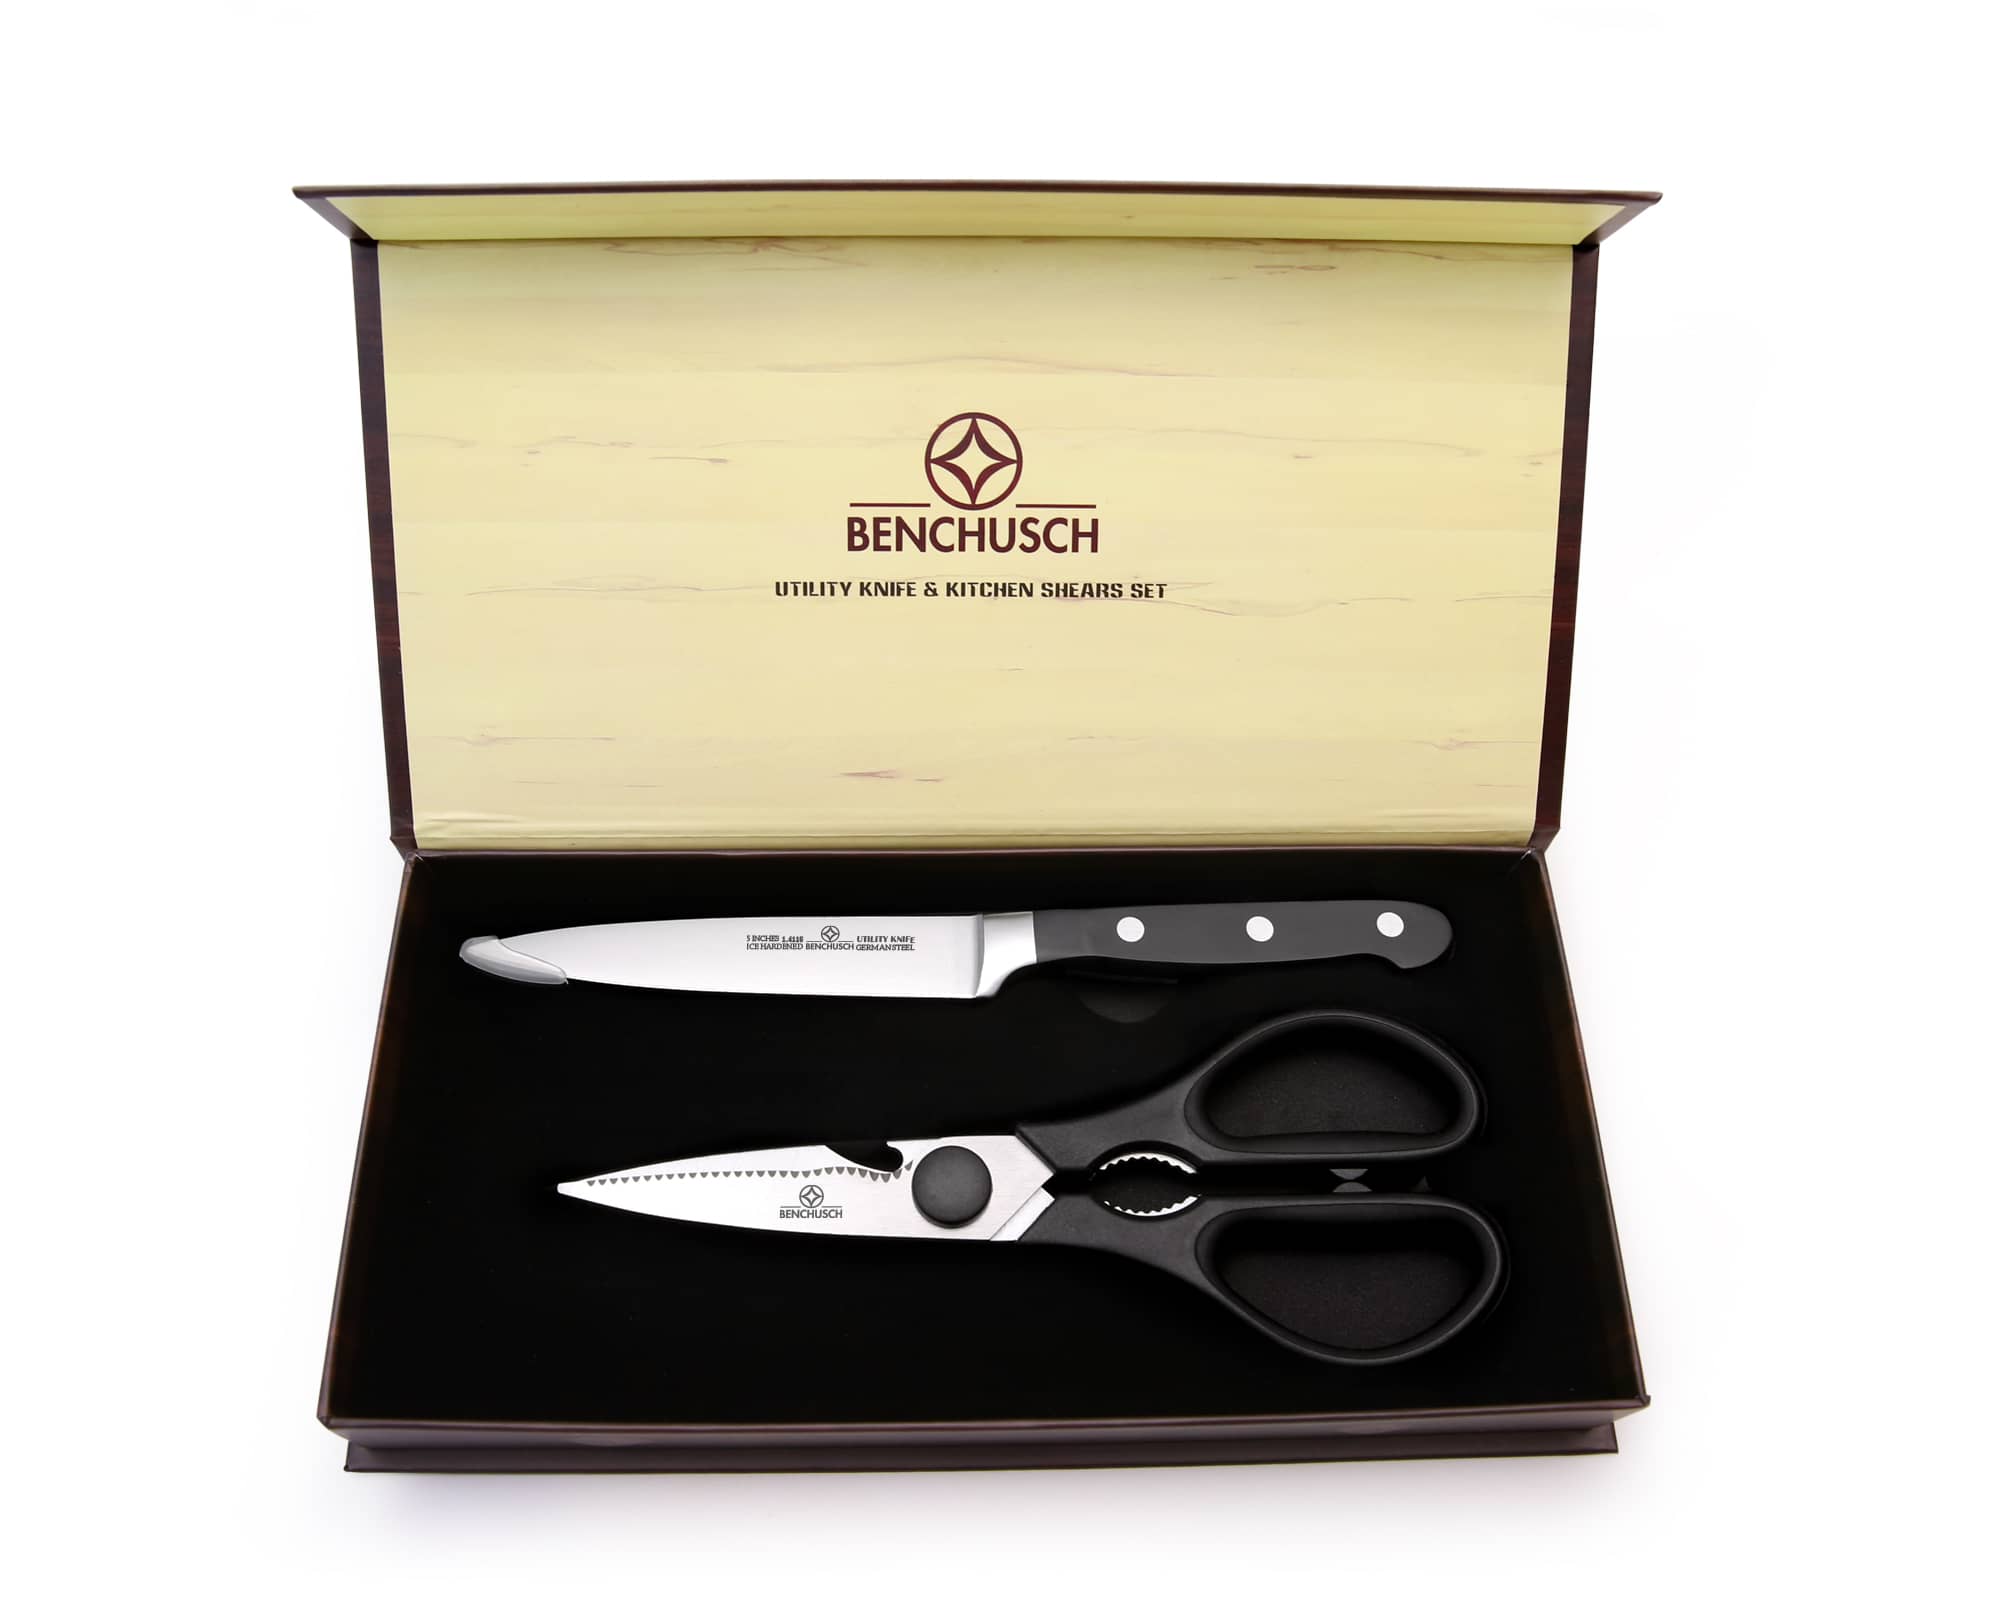 Benchusch Classic 5-inch Utility Knife and 8-Inch Scissors with opened elegant box